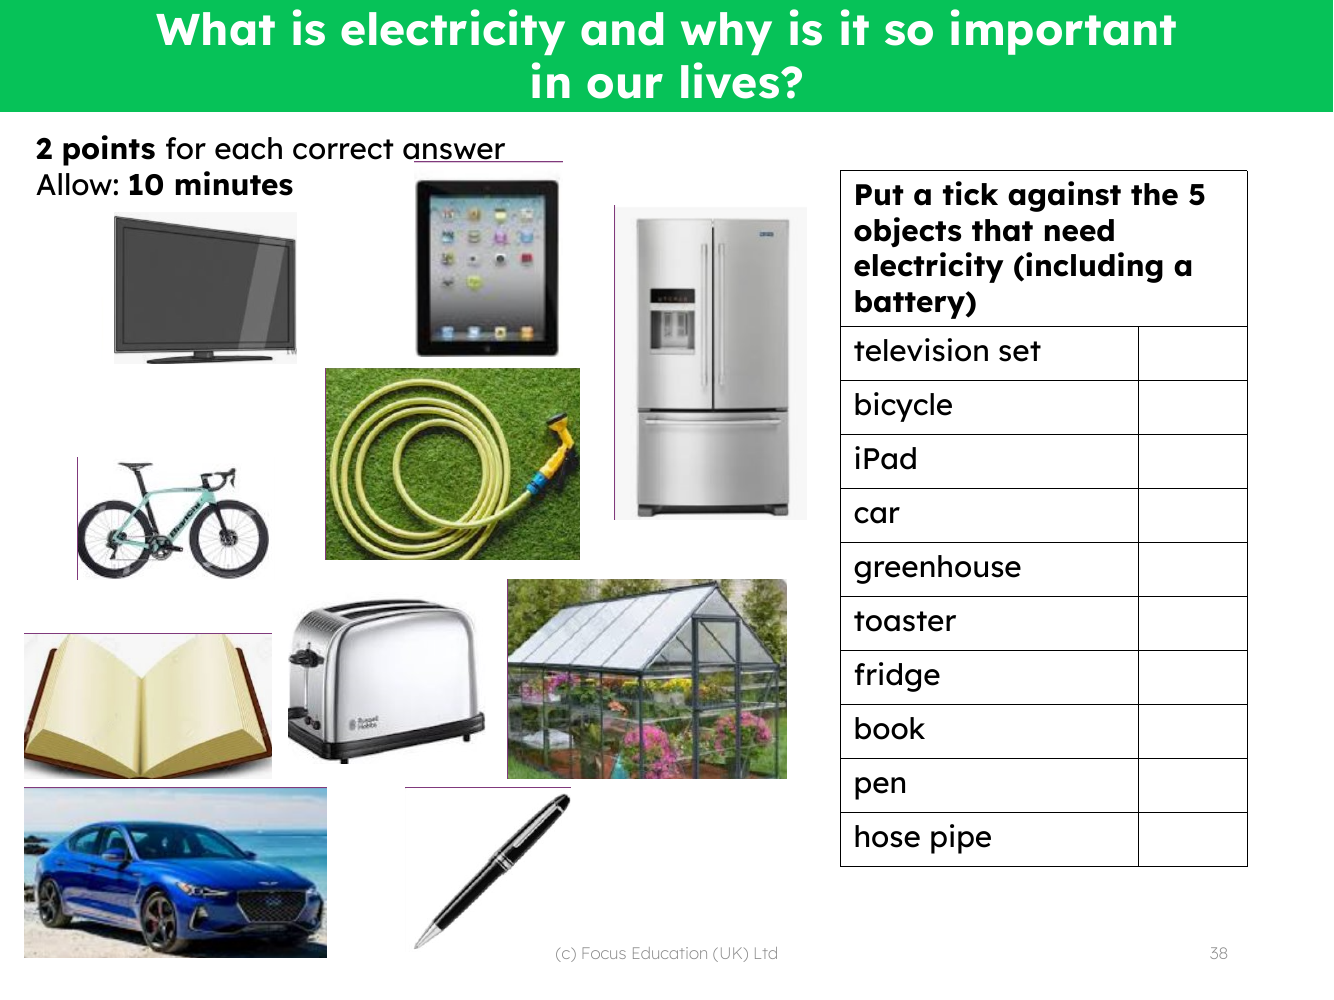 Yes or no - Which of these needs electricity?